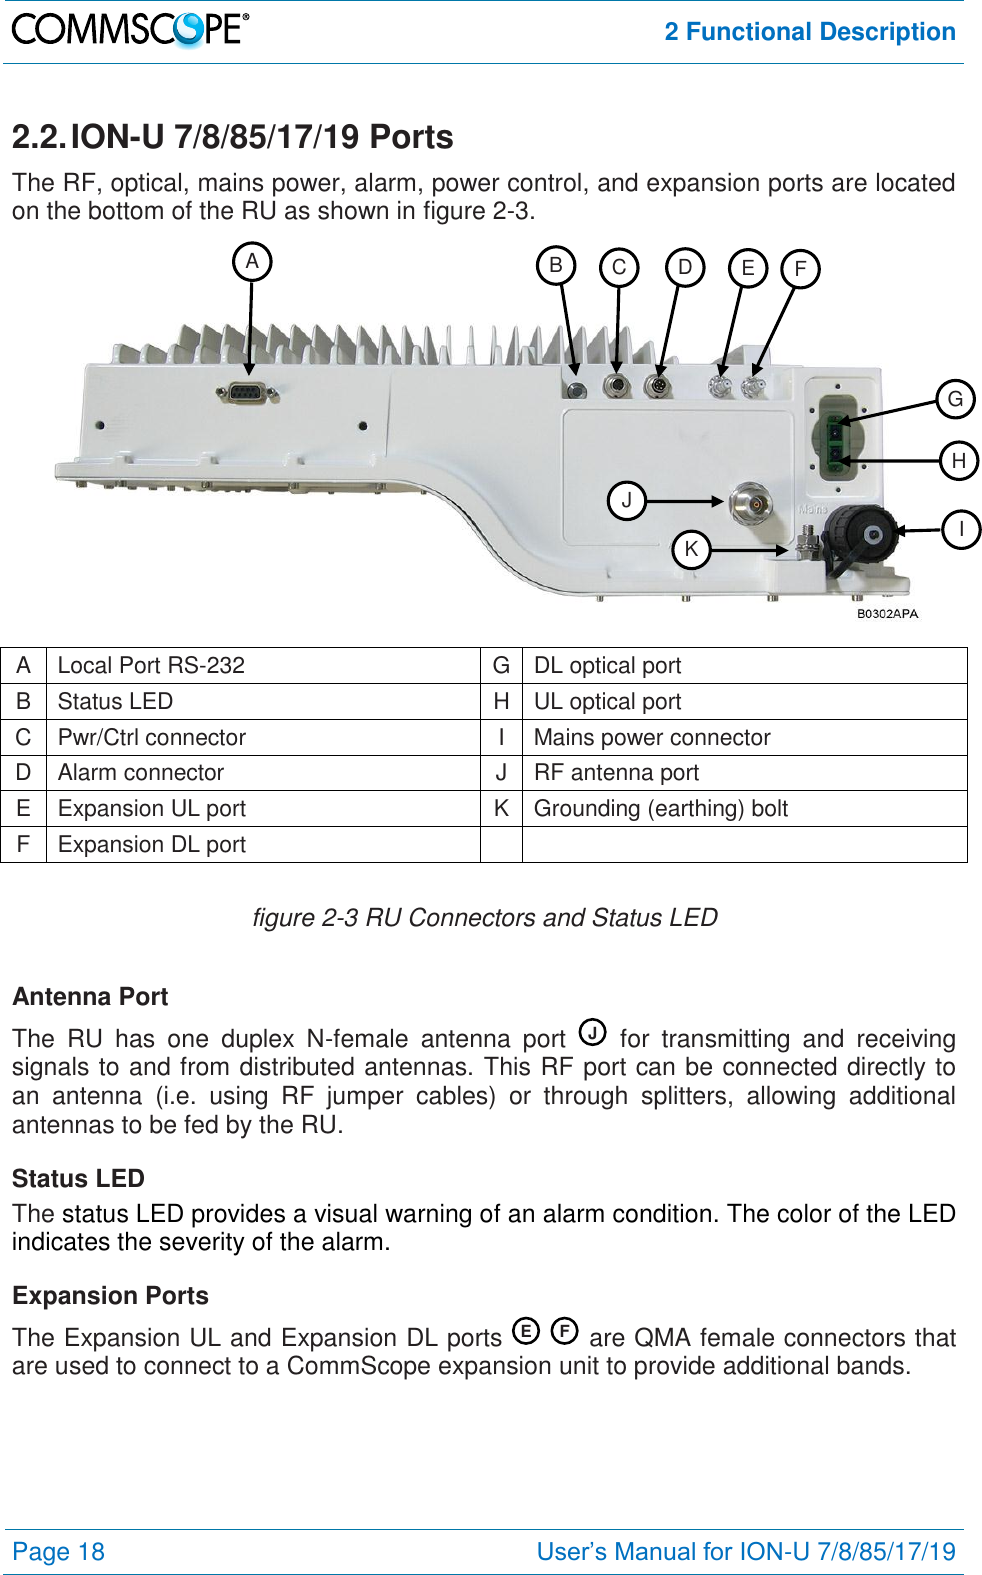  2 Functional Description  Page 18 User’s Manual for ION-U 7/8/85/17/19  2.2. ION-U 7/8/85/17/19 Ports The RF, optical, mains power, alarm, power control, and expansion ports are located on the bottom of the RU as shown in figure 2-3.    A Local Port RS-232 G DL optical port B Status LED H UL optical port C Pwr/Ctrl connector I Mains power connector D Alarm connector J RF antenna port E Expansion UL port K Grounding (earthing) bolt F Expansion DL port    figure 2-3 RU Connectors and Status LED Antenna Port The  RU  has  one  duplex  N-female  antenna  port    for  transmitting  and  receiving signals to and from distributed antennas. This RF port can be connected directly to an  antenna  (i.e.  using  RF  jumper  cables)  or  through  splitters,  allowing  additional antennas to be fed by the RU. Status LED The status LED provides a visual warning of an alarm condition. The color of the LED indicates the severity of the alarm. Expansion Ports The Expansion UL and Expansion DL ports     are QMA female connectors that are used to connect to a CommScope expansion unit to provide additional bands. J F E A B C D E F H G I J K 